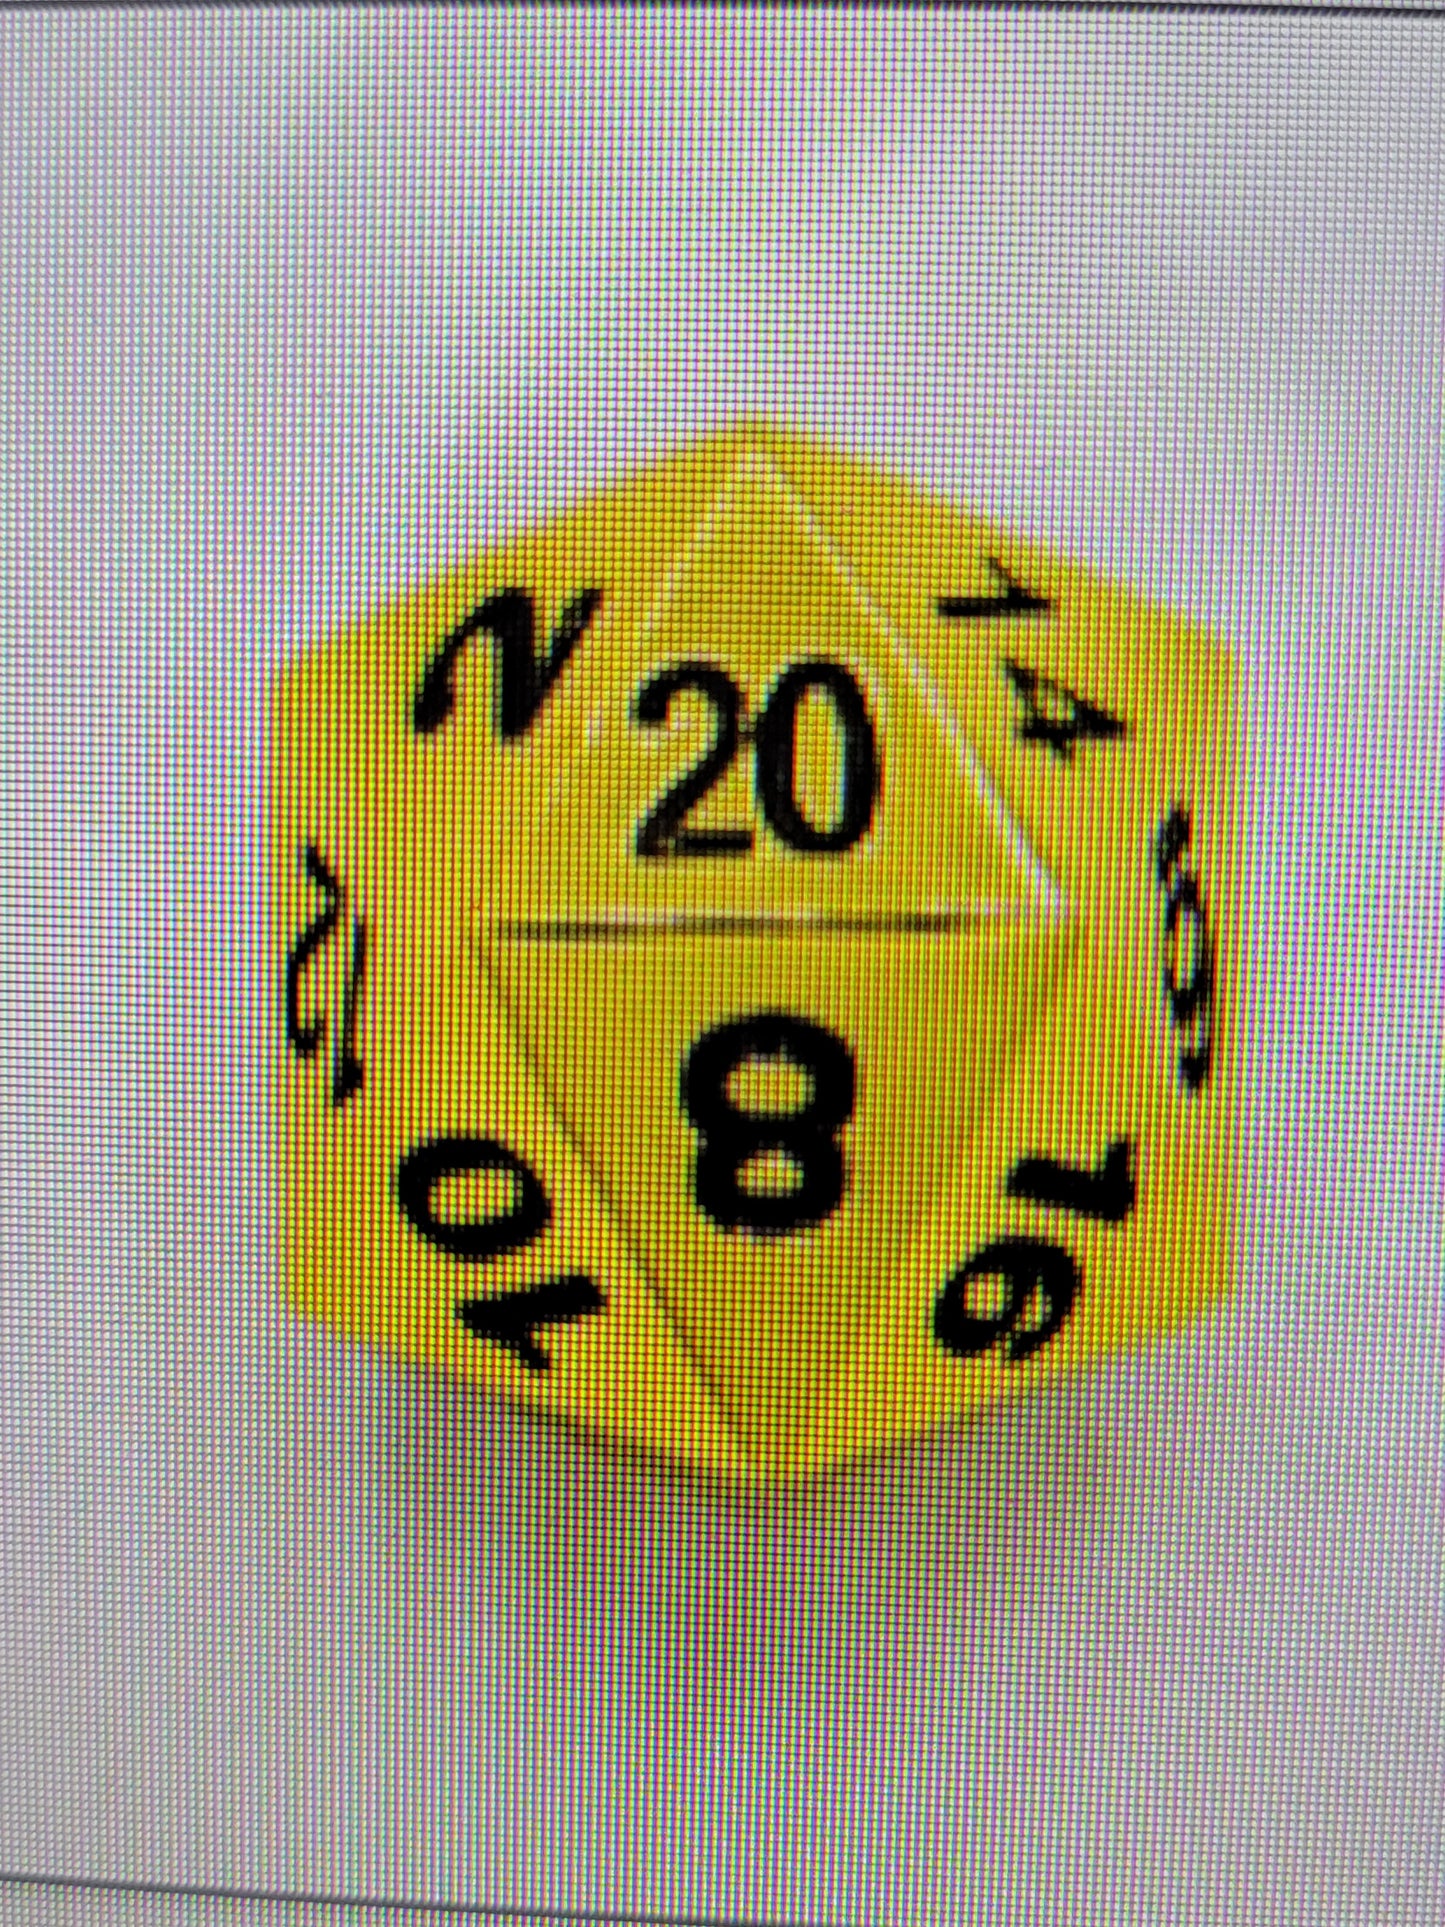 Single Metal D20 - Shiny Gold with Black numbers